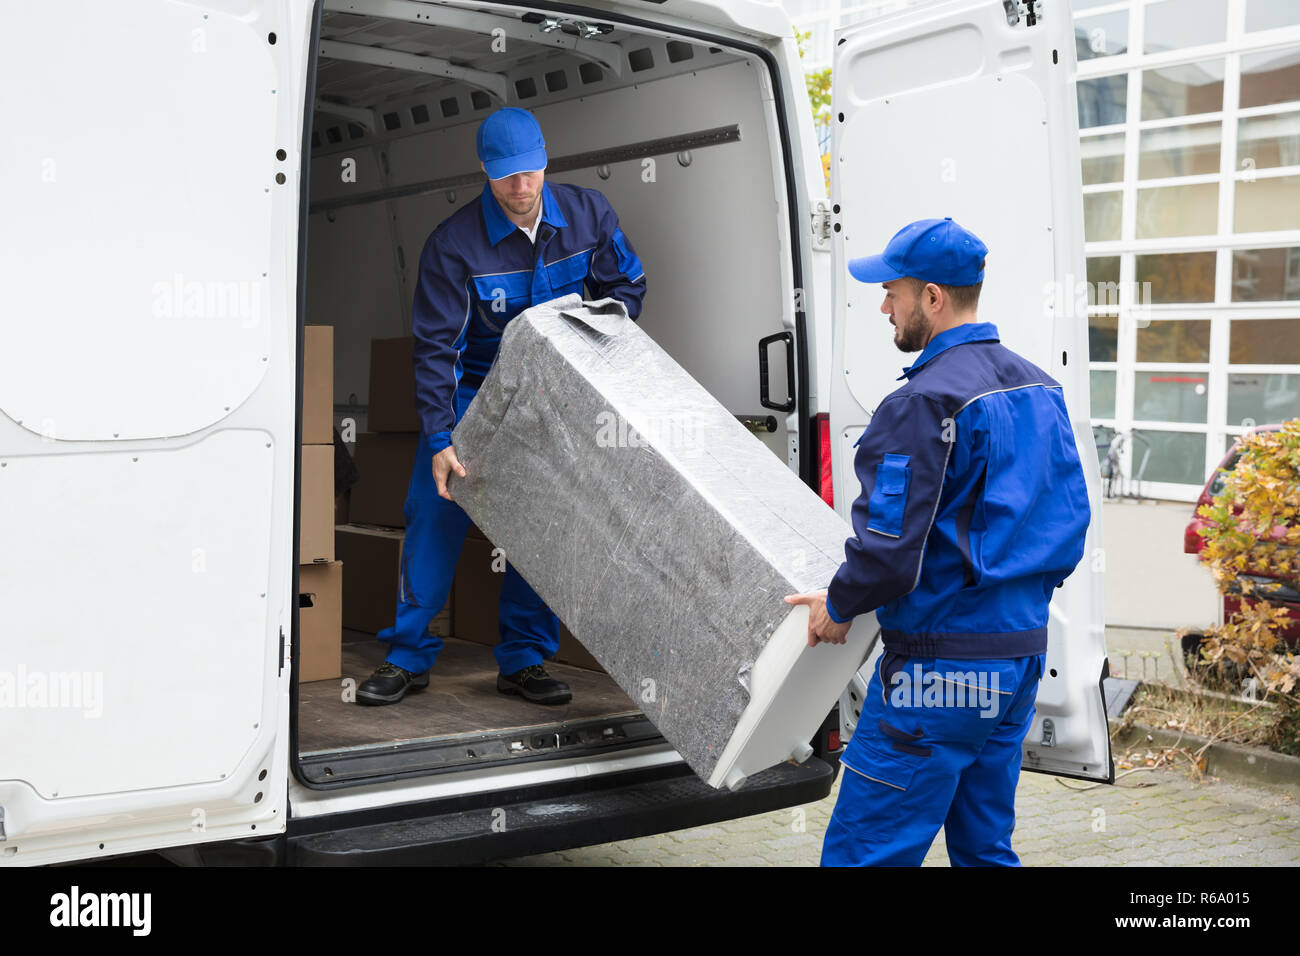 Two Delivery Men Unloading Furniture From Vehicle Stock Photo